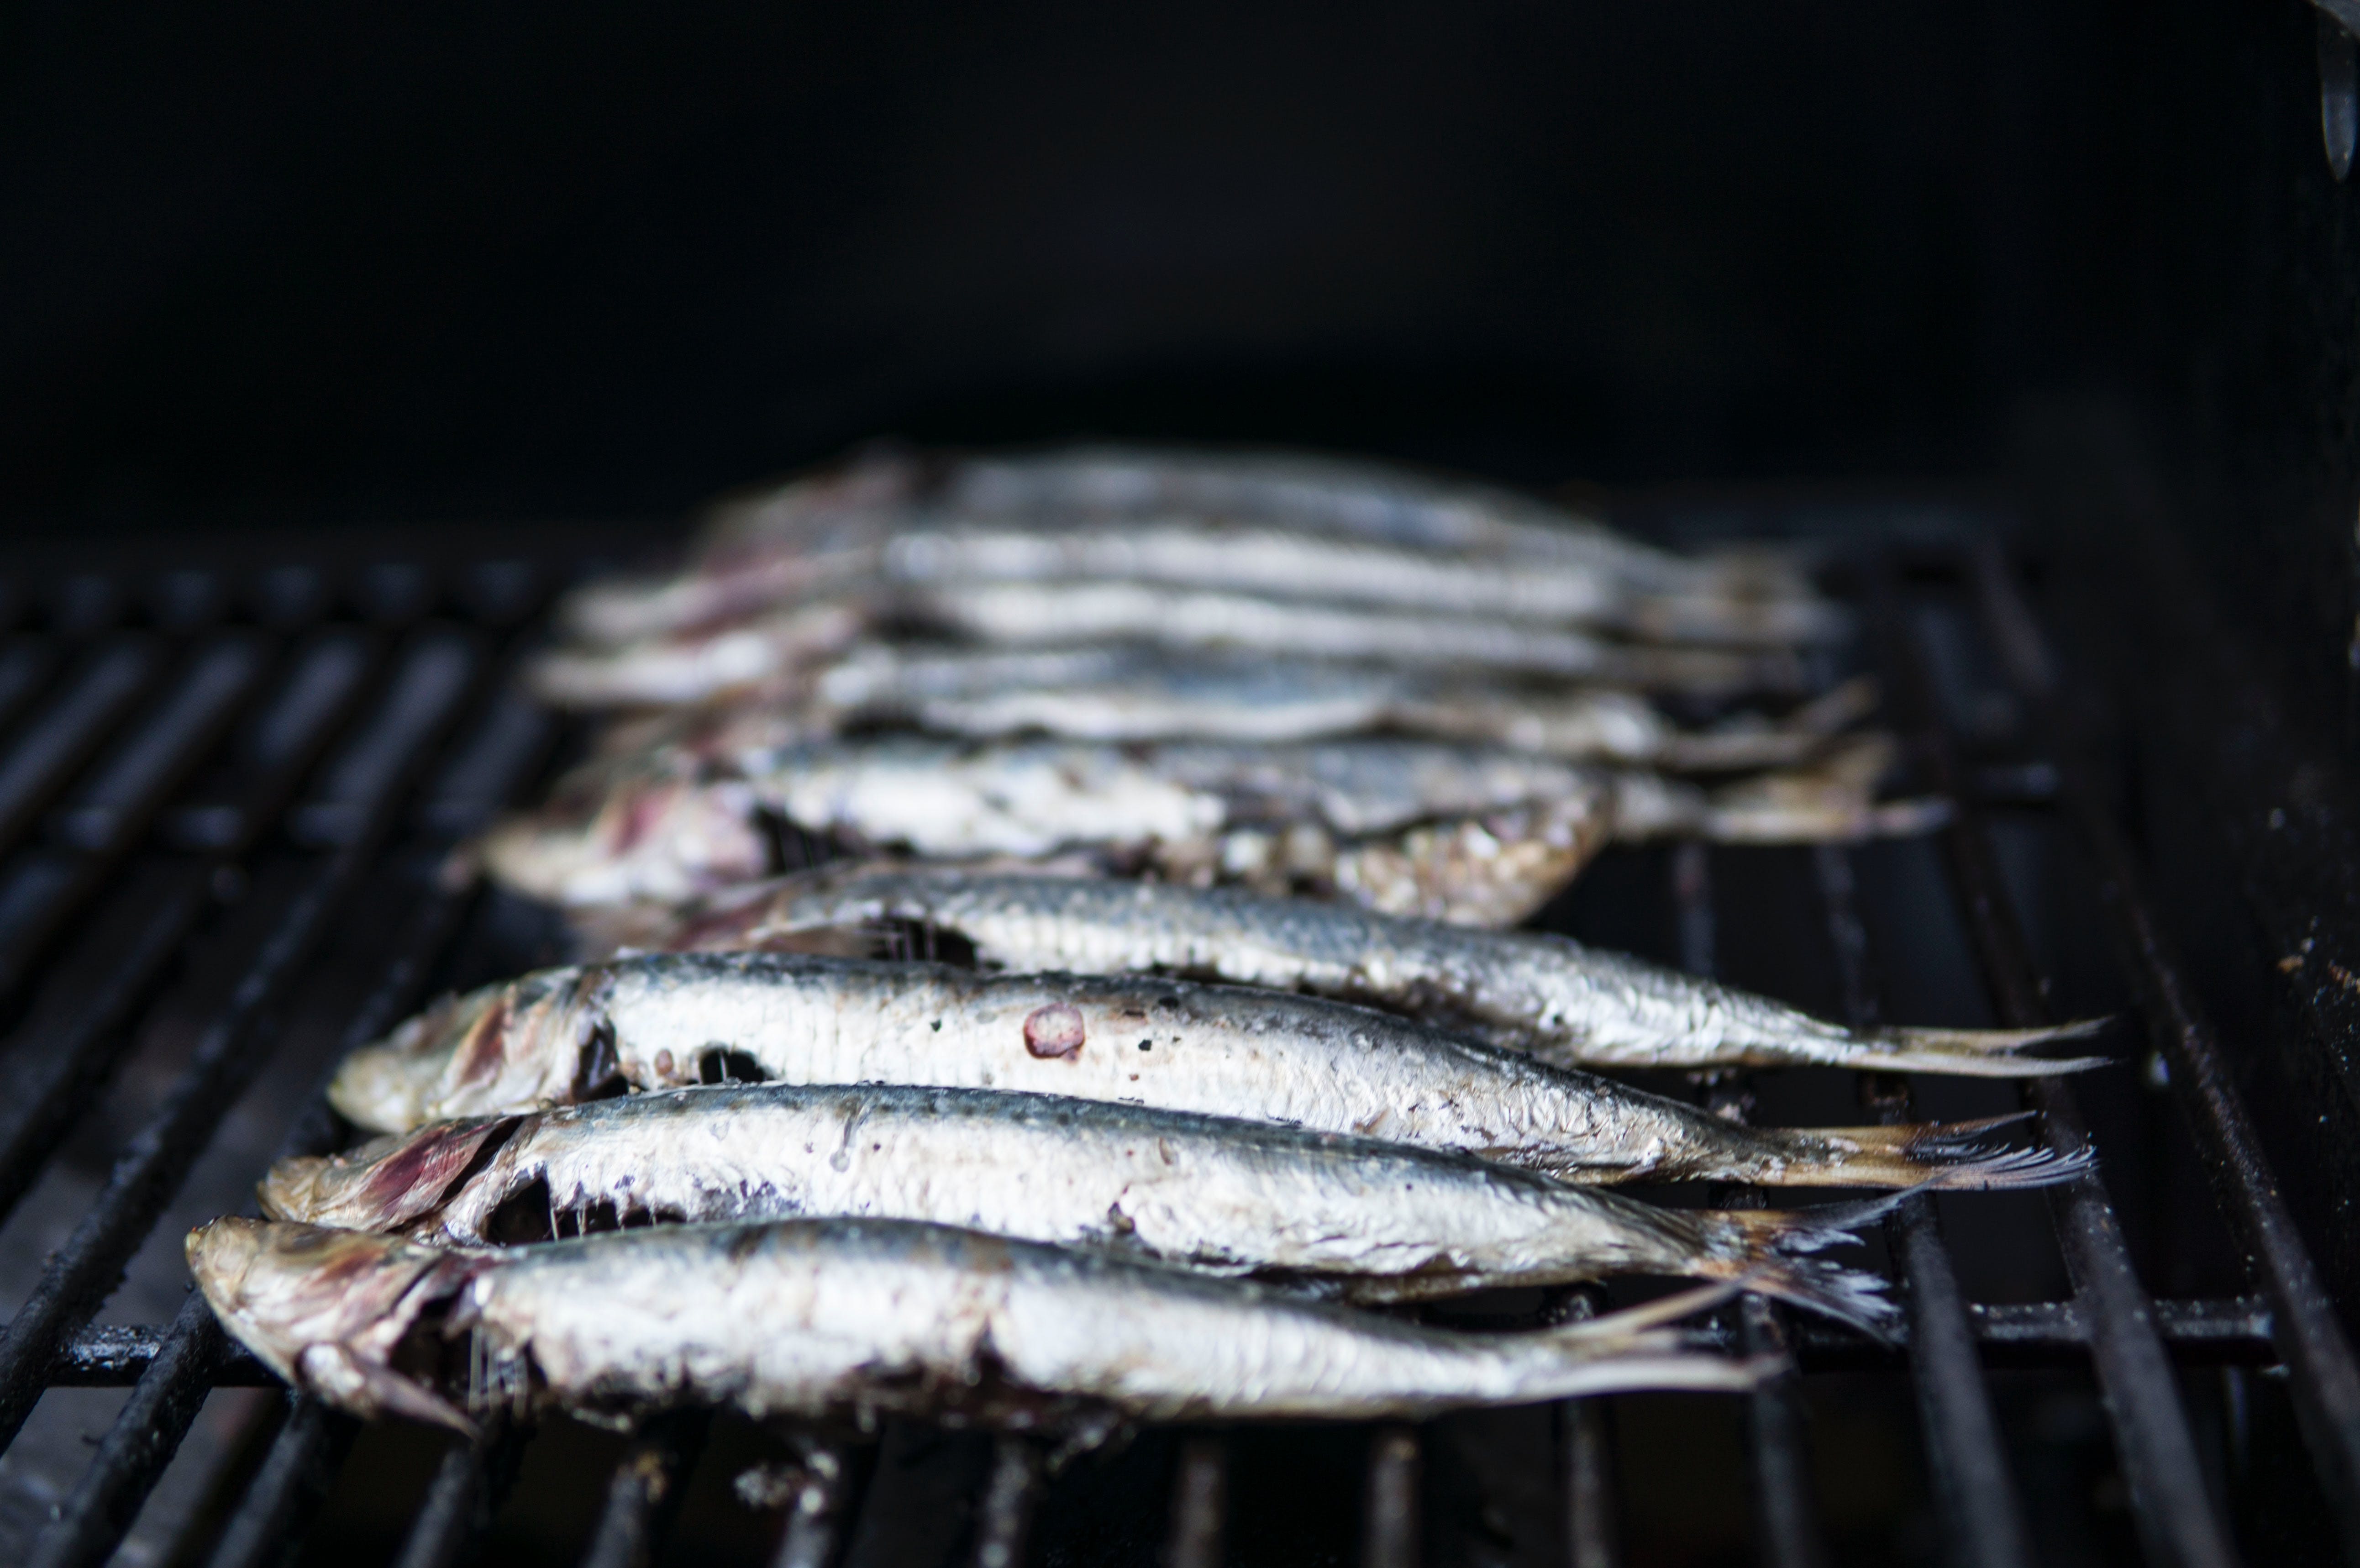 Picture of sardines by Elle Hughes - Pexel